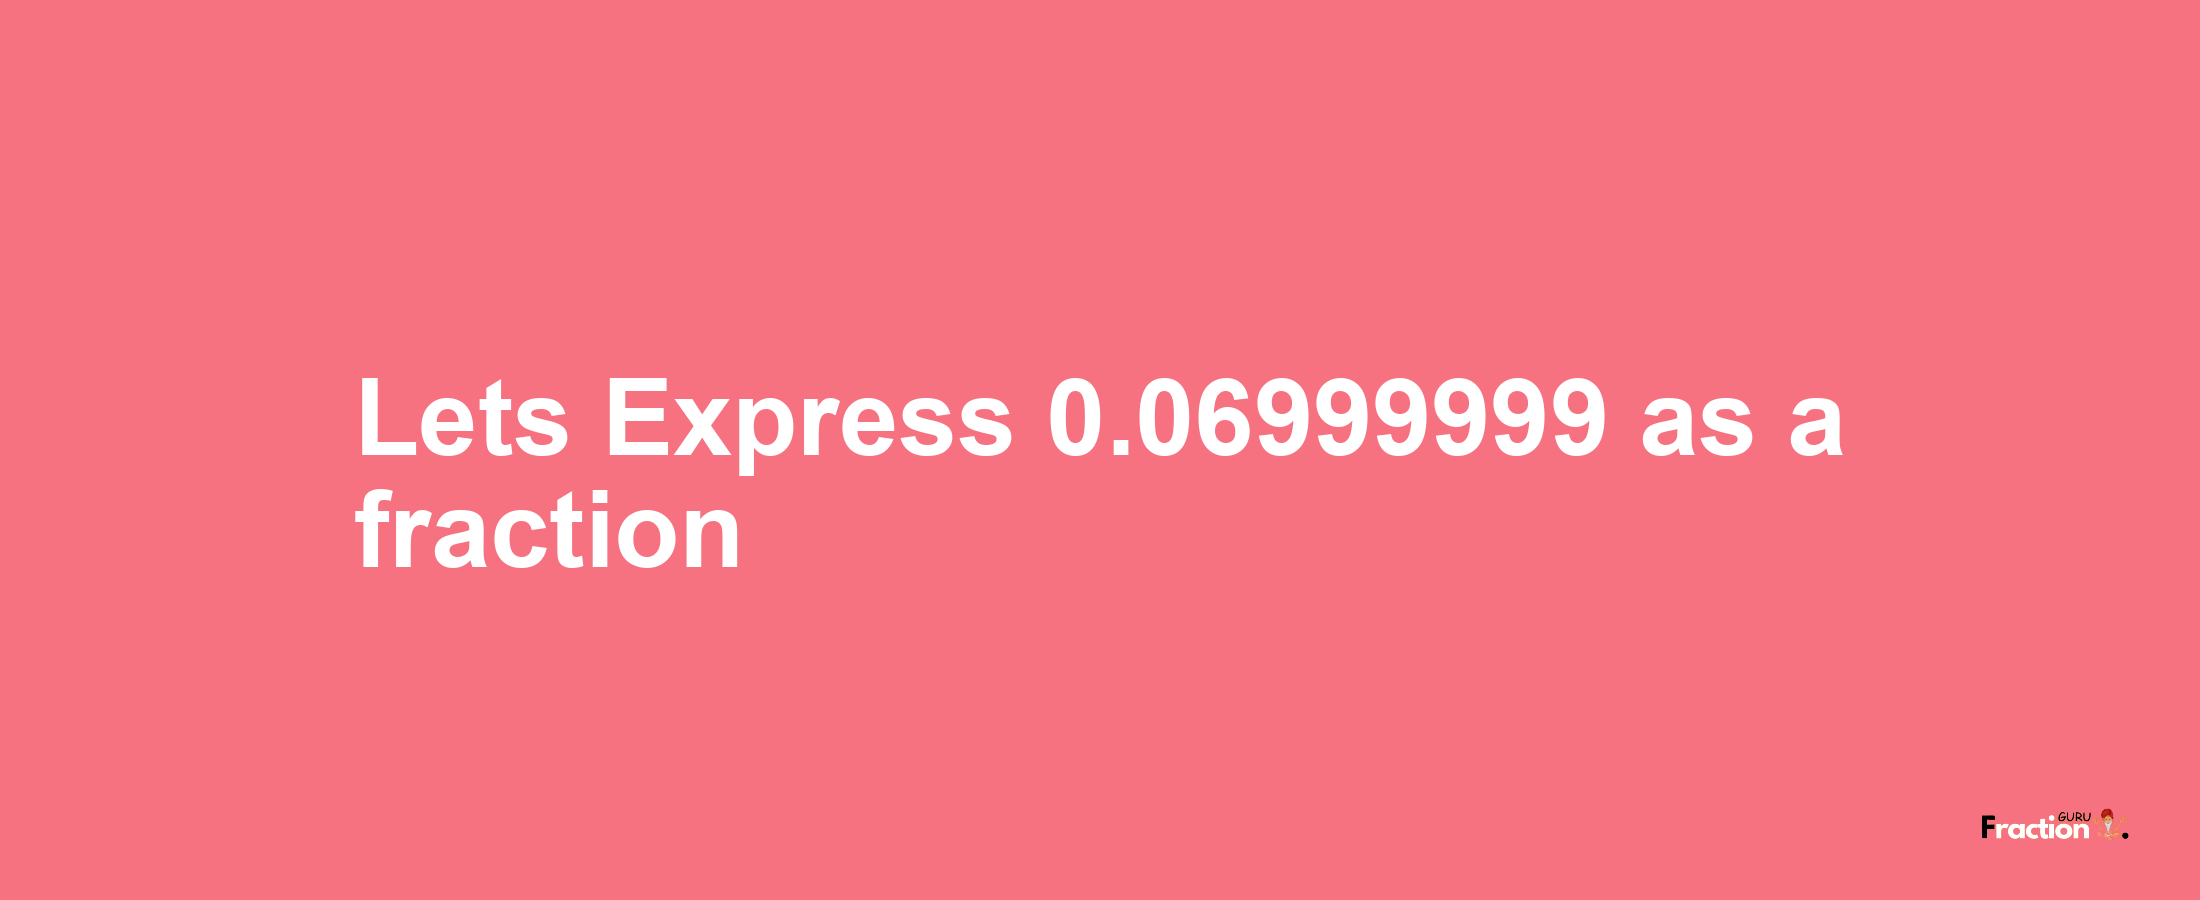 Lets Express 0.06999999 as afraction